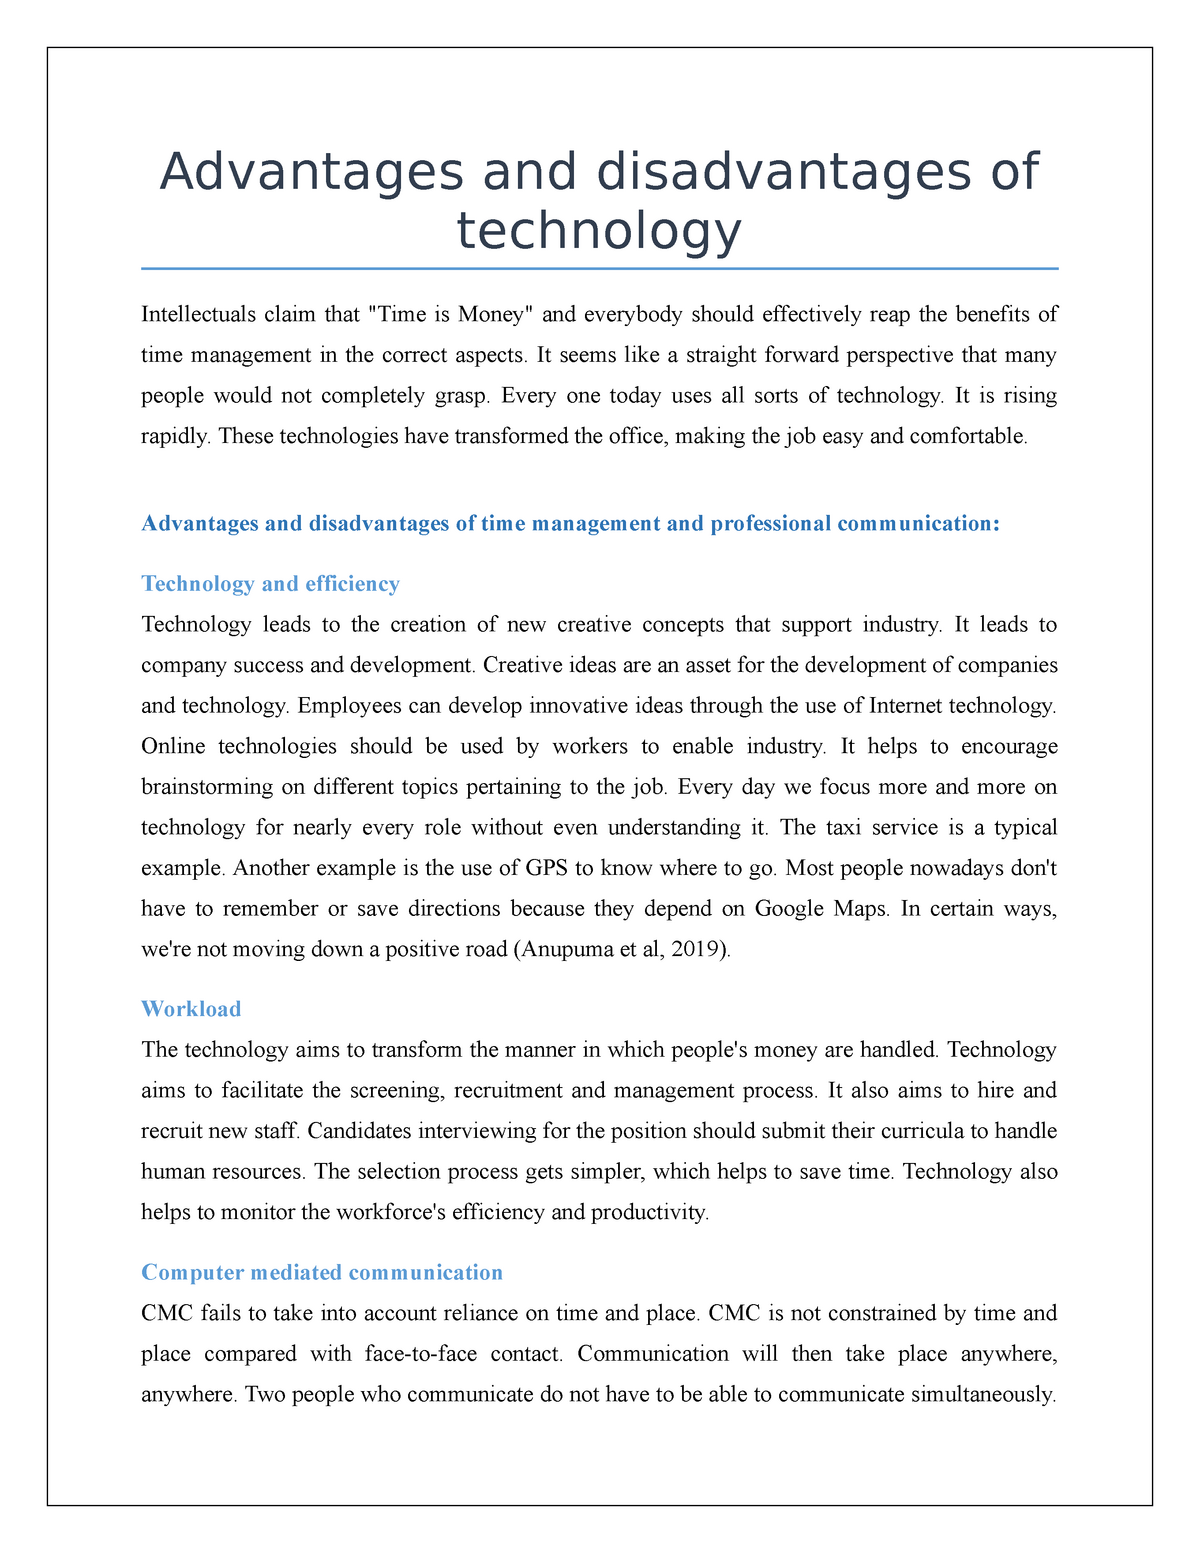 advantages and disadvantages of technology essay 250 words